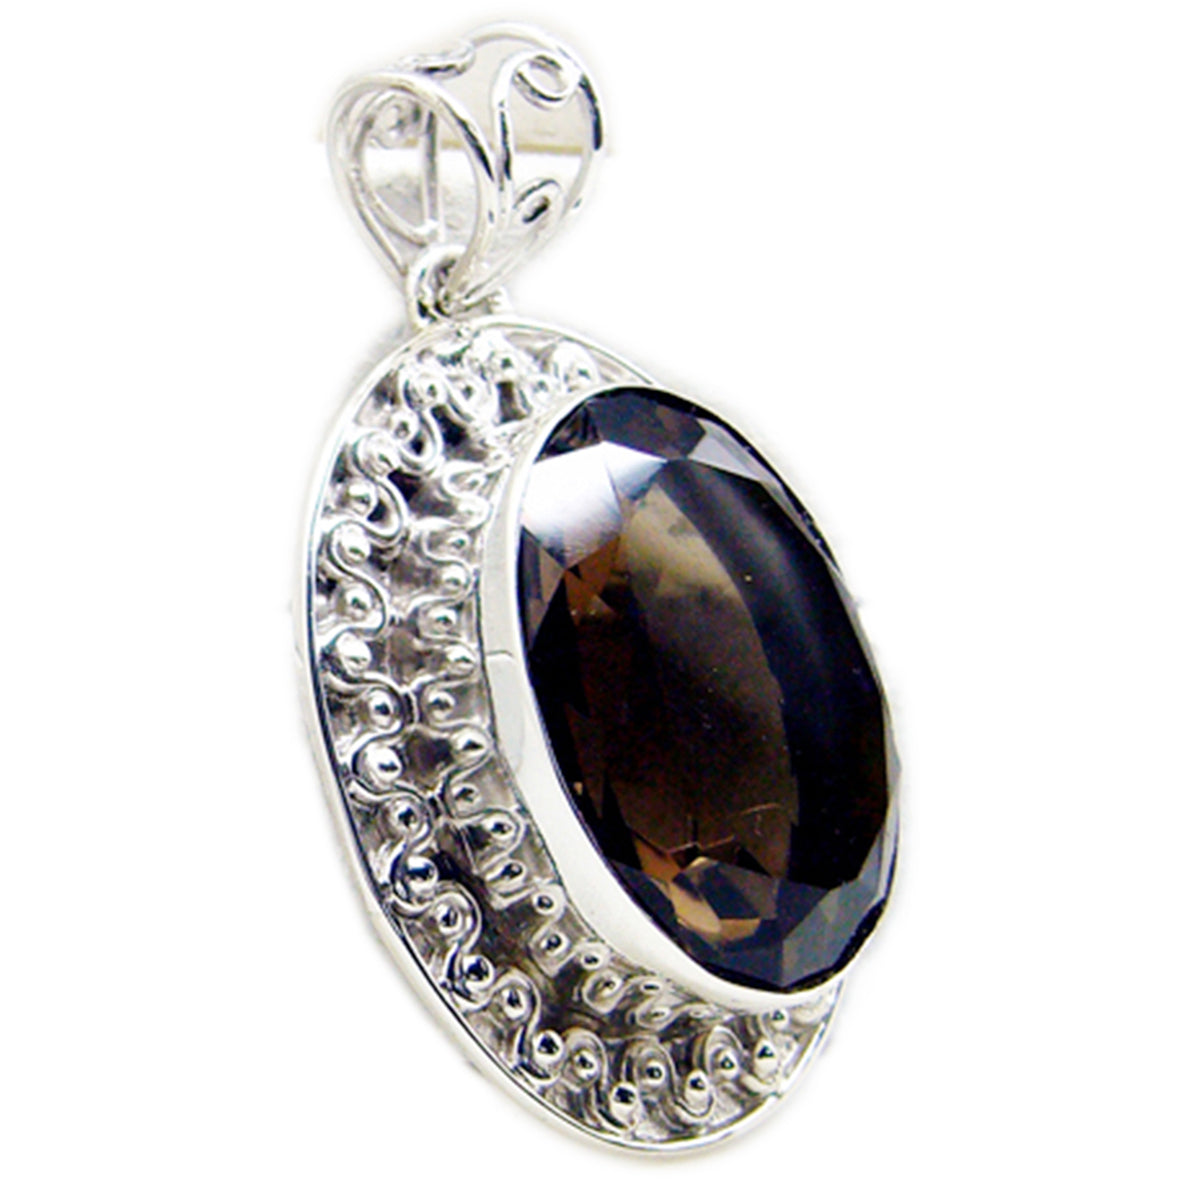 Riyo Nice Gemstone Oval Faceted Brown smoky quartz Solid Silver Pendant gift for good